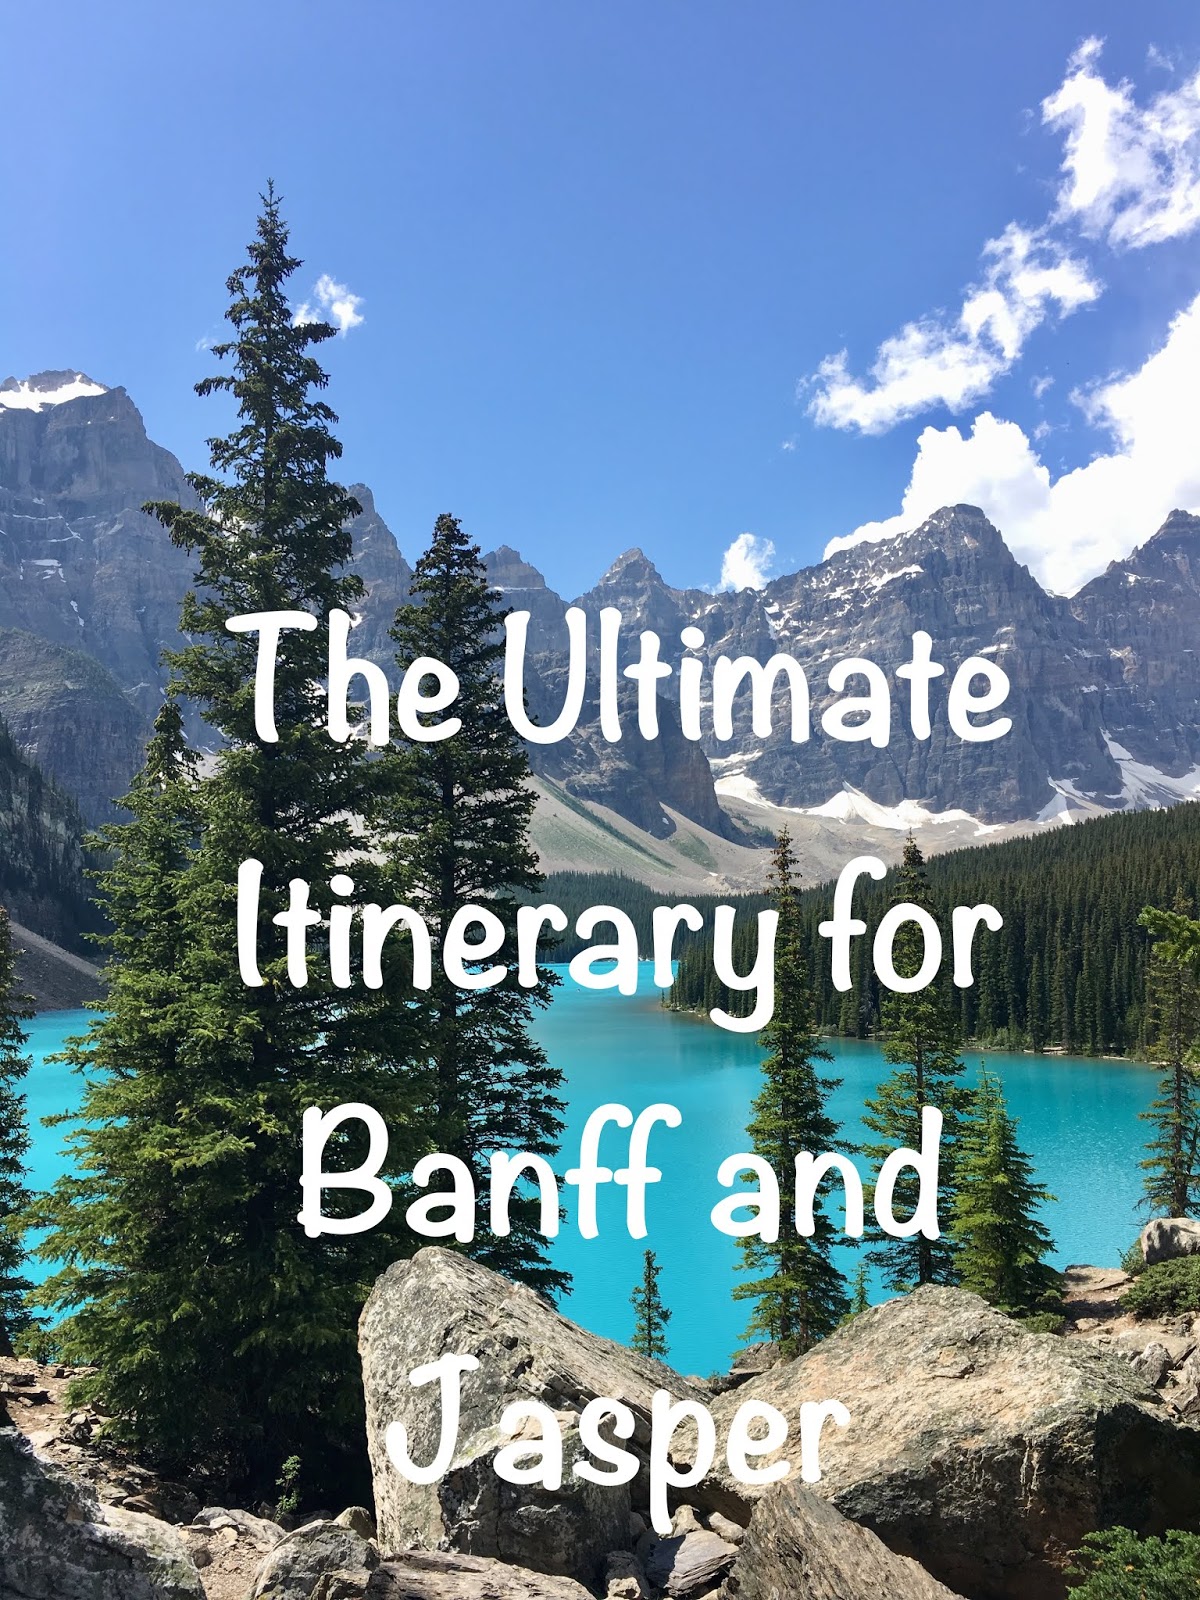 The Ultimate Itinerary for a trip to Banff and Jasper | Trip to Banff | 9 Days in Banff | What To Do On Your Trip to Banff | The Perfect Itinerary for Your Trip to Banff 